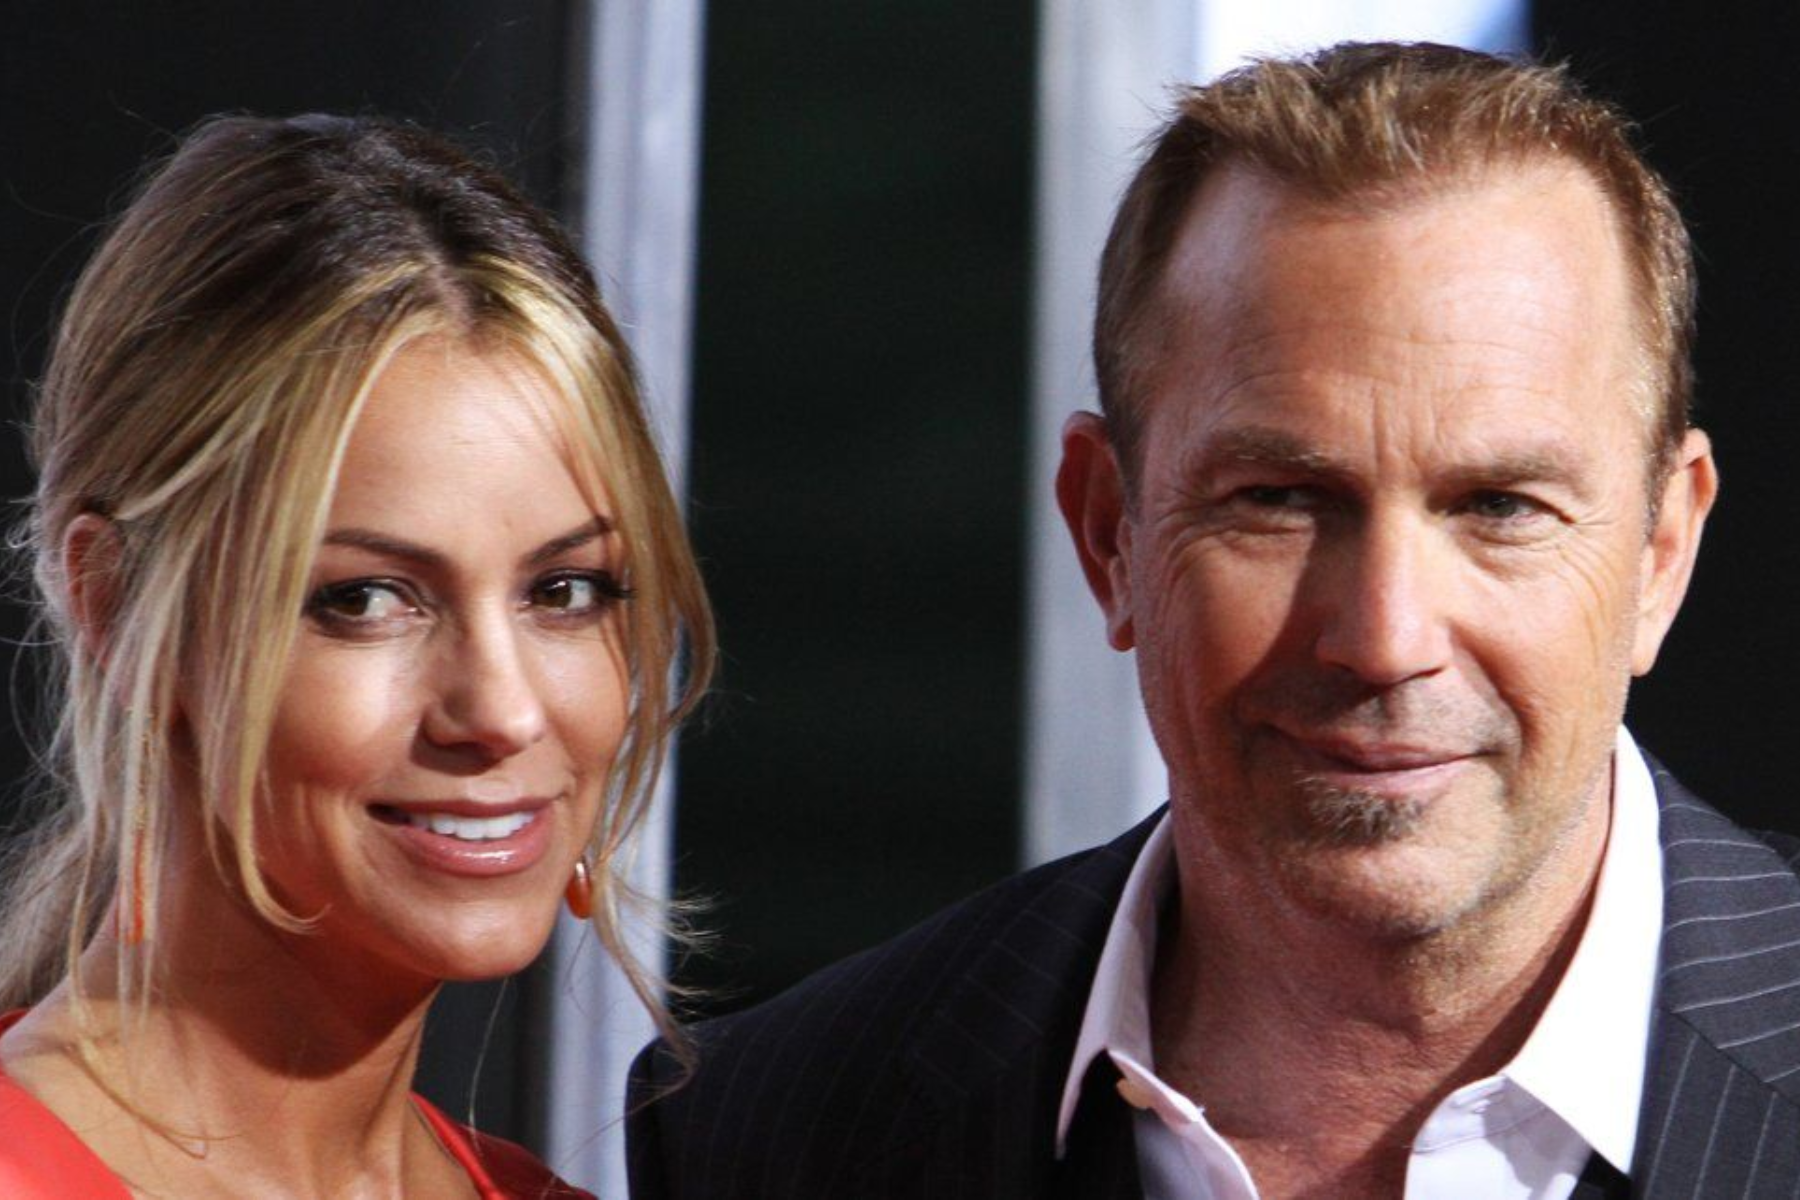 Christine Baumgartner and Kevin Costner are smiling and looking far away